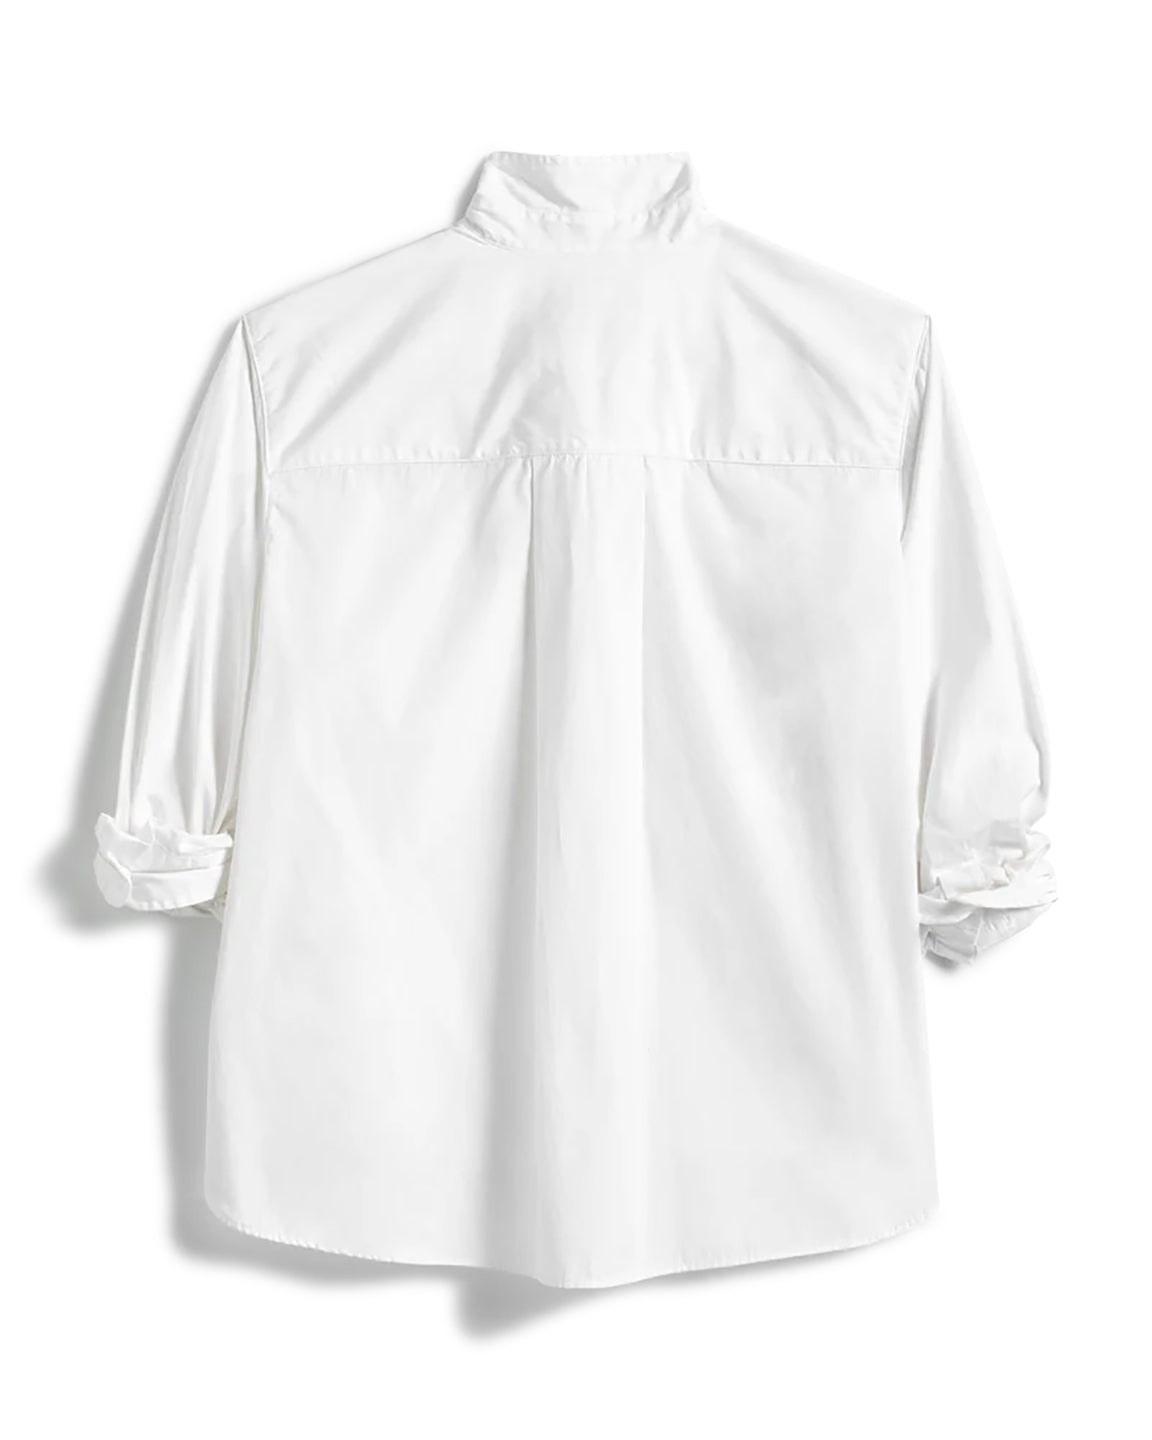 Frank and Eileen Silvio Untuckable Button Up Shirt in White